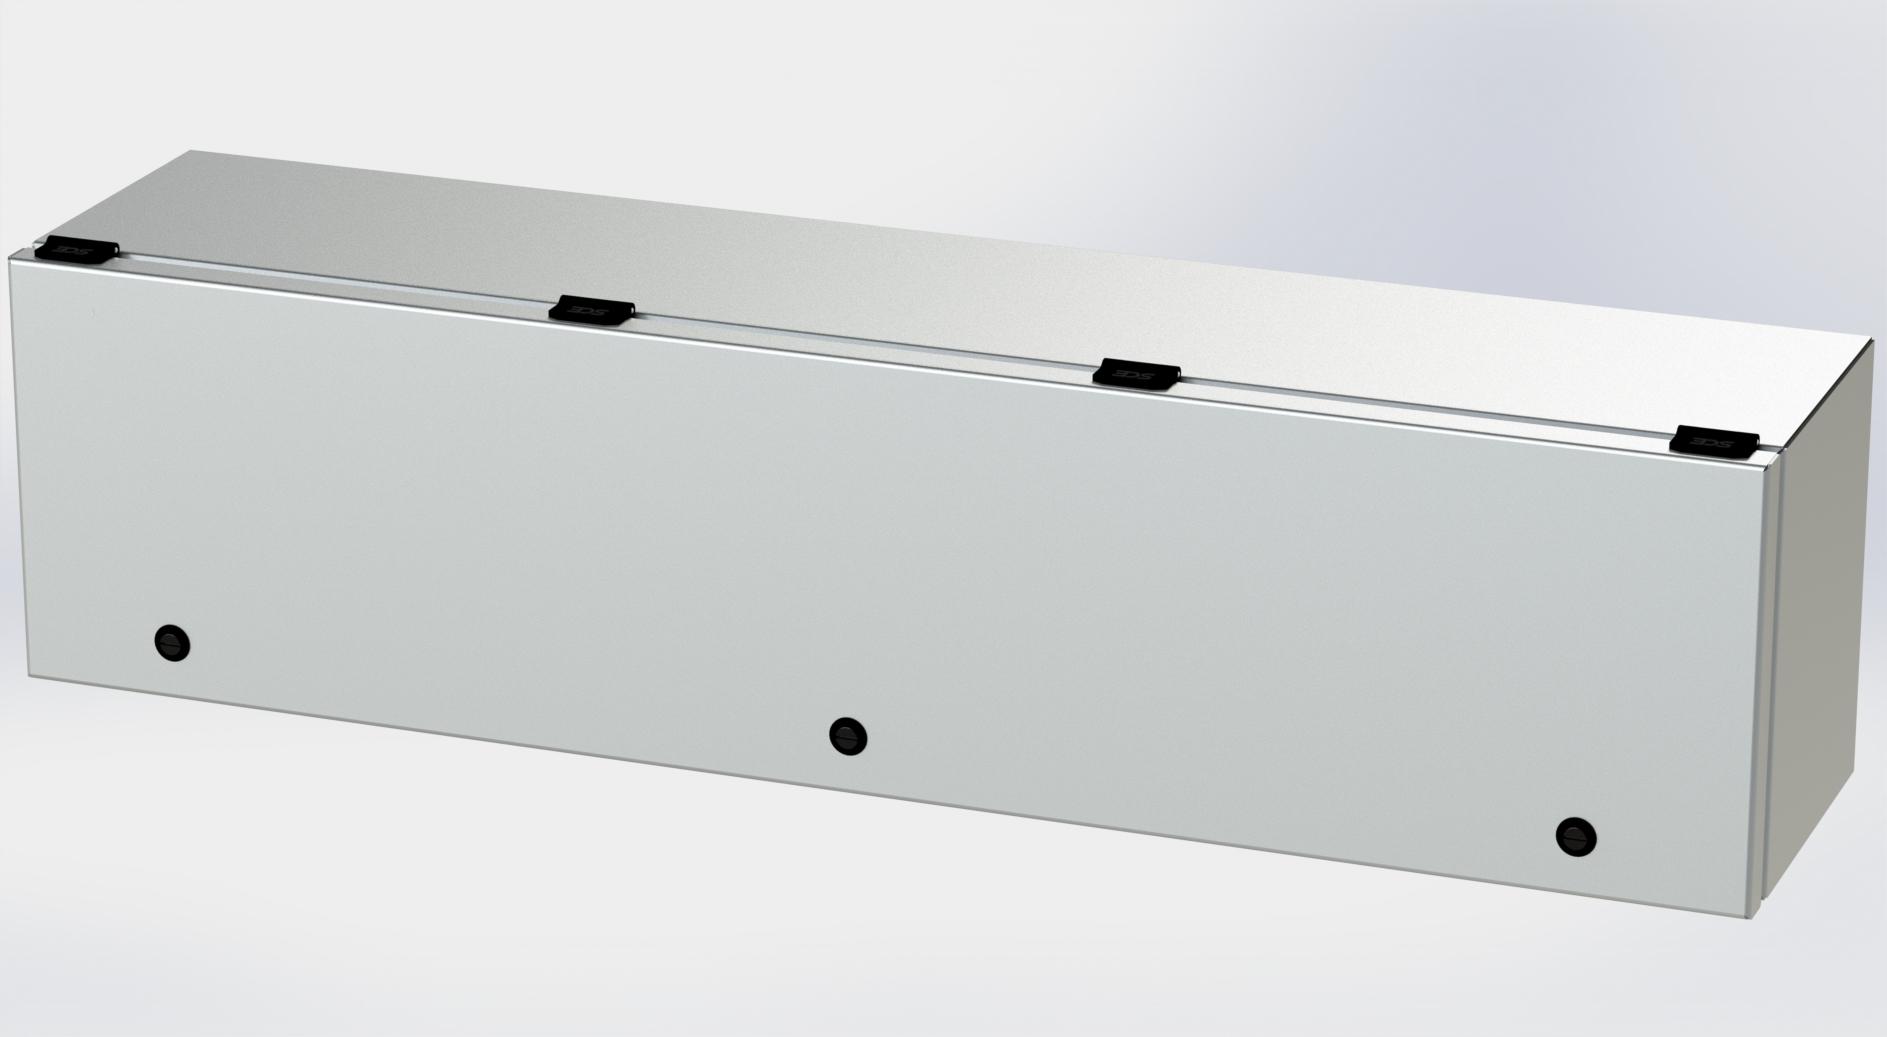 Saginaw Control SCE-L9368ELJSS S.S. ELJ Trough Enclosure, Height:9.00", Width:36.00", Depth:8.00", #4 brushed finish on all exterior surfaces. Optional sub-panels are powder coated white.